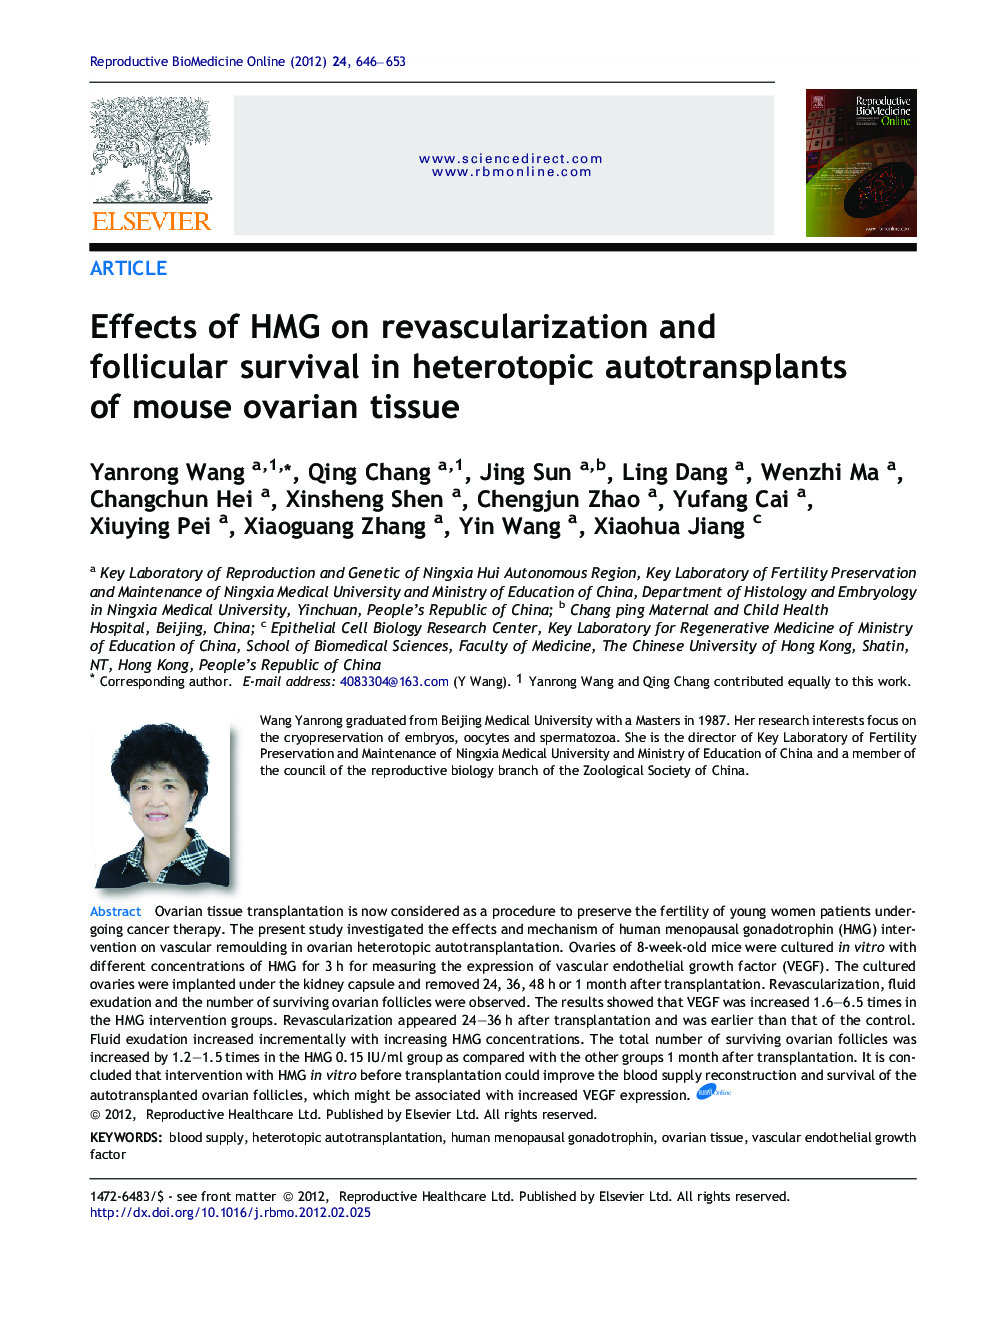 Effects of HMG on revascularization and follicular survival in heterotopic autotransplants of mouse ovarian tissue 